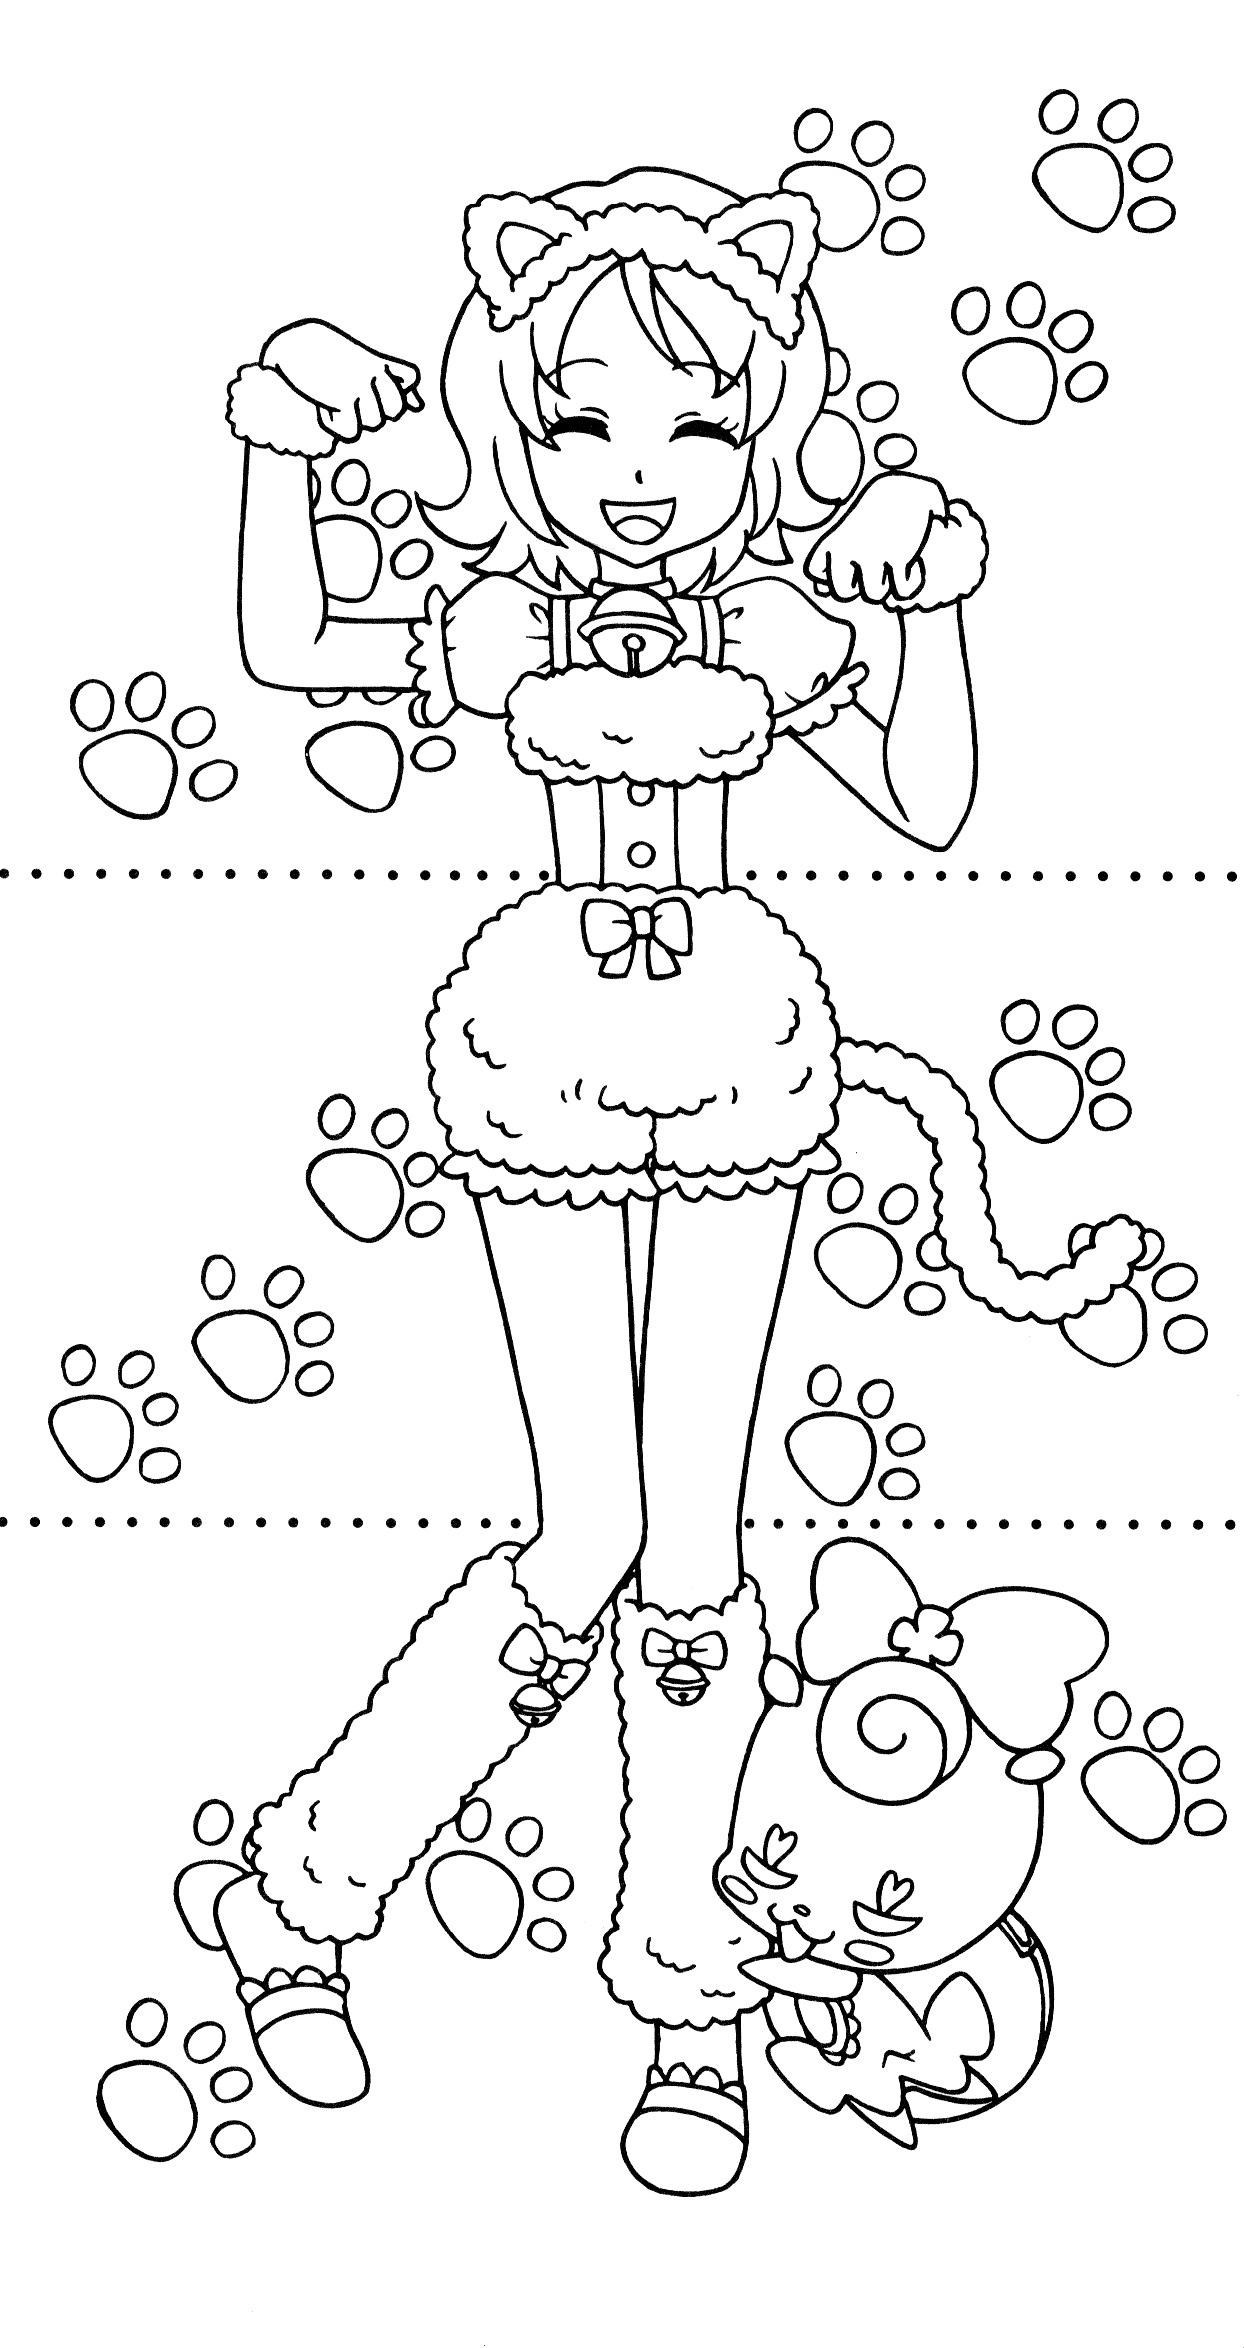 Happiness Charge Precure Dressup Coloring Book 2